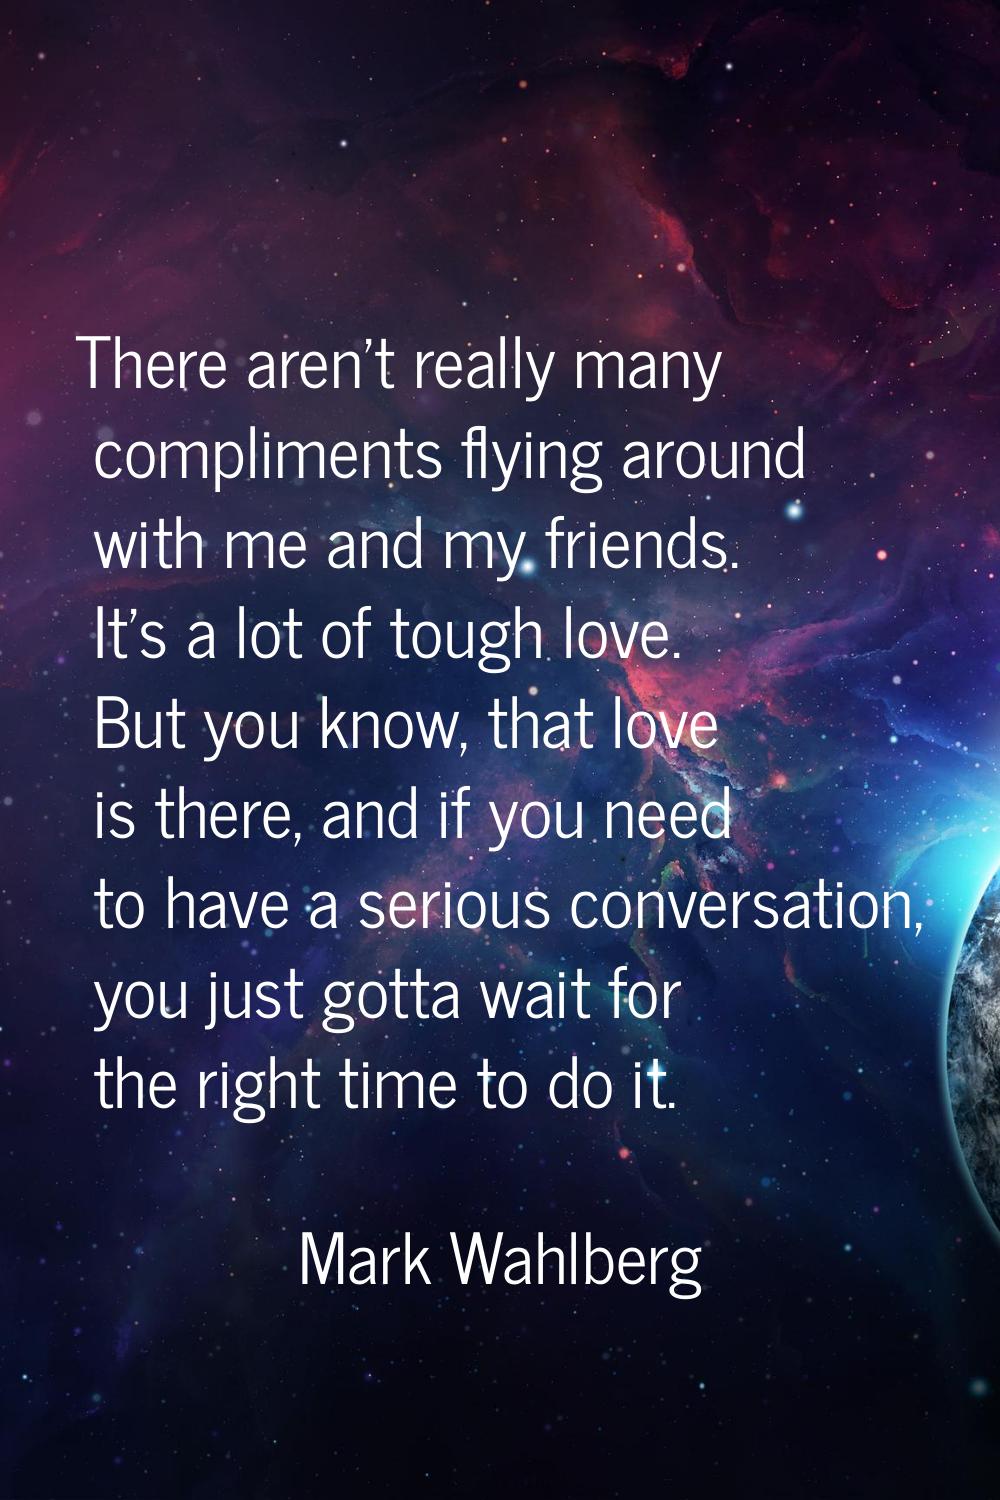 There aren't really many compliments flying around with me and my friends. It's a lot of tough love